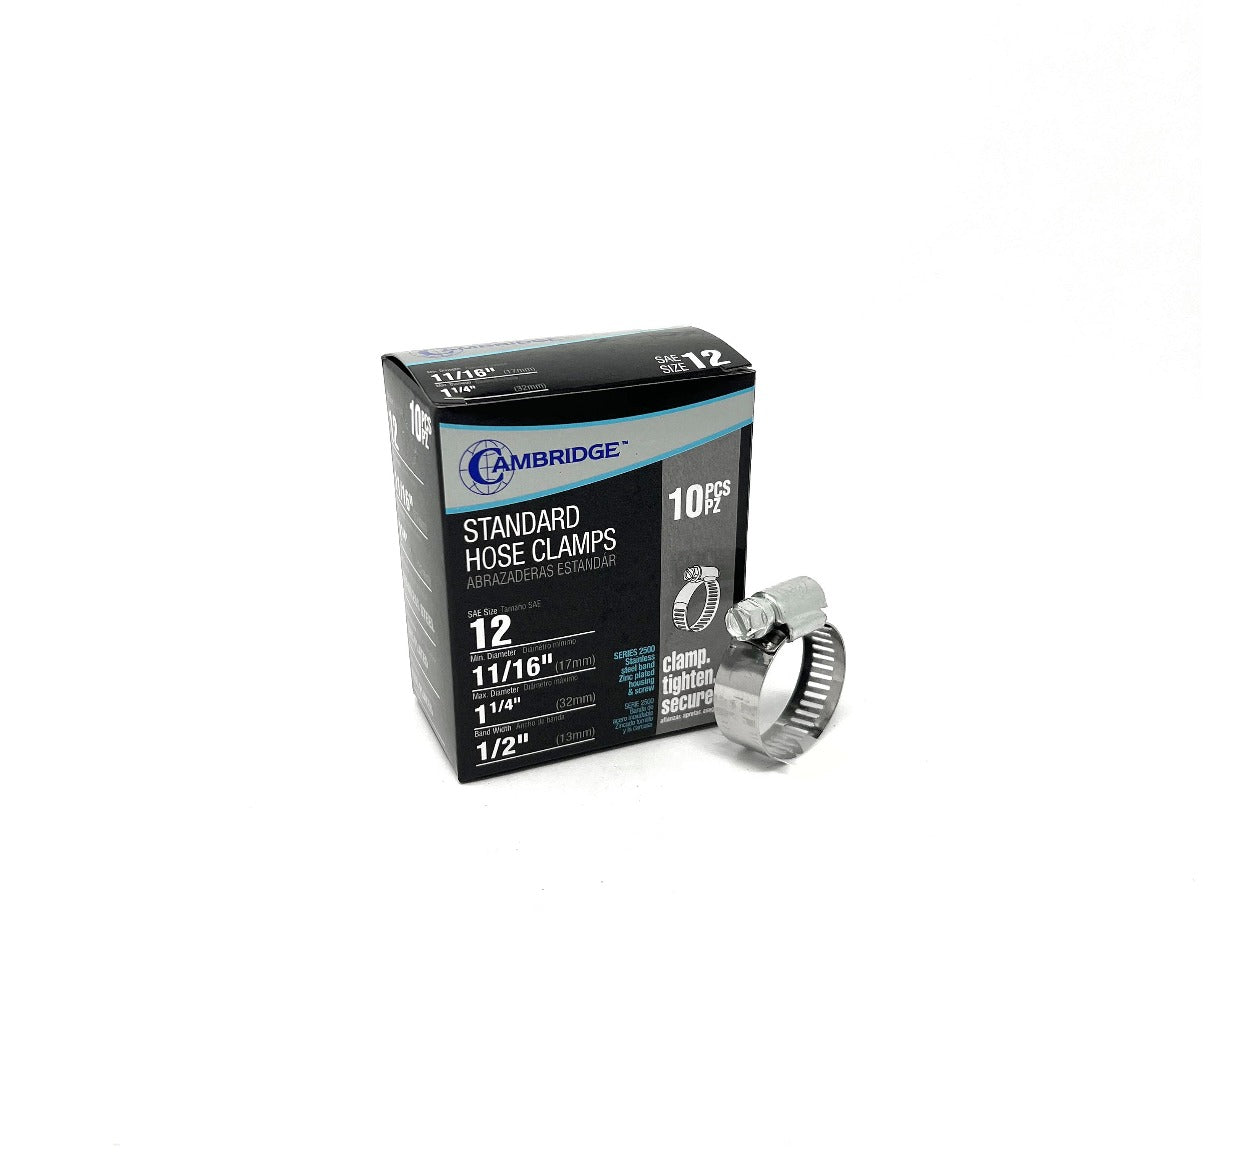 #12   11/16 TO 1 1/4 STANDARD HOSE CLAMP (Box of 10)